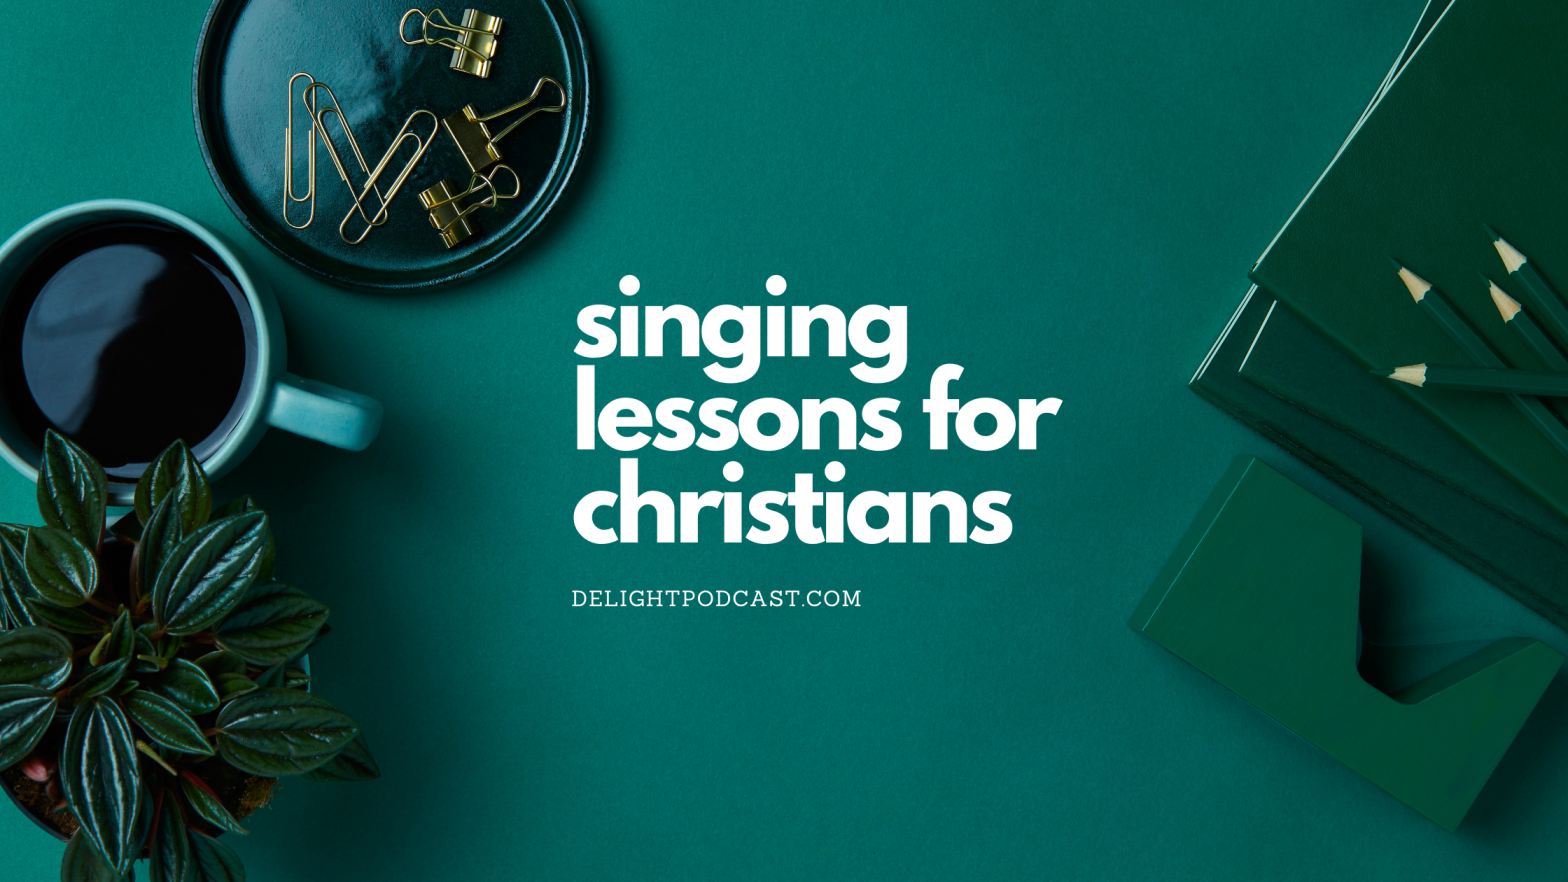 Singing Lessons for Christians blog by leah sax church Delight Podcast for new Christians and encouragement for others with Adam Curtis and Leah sax Season 2